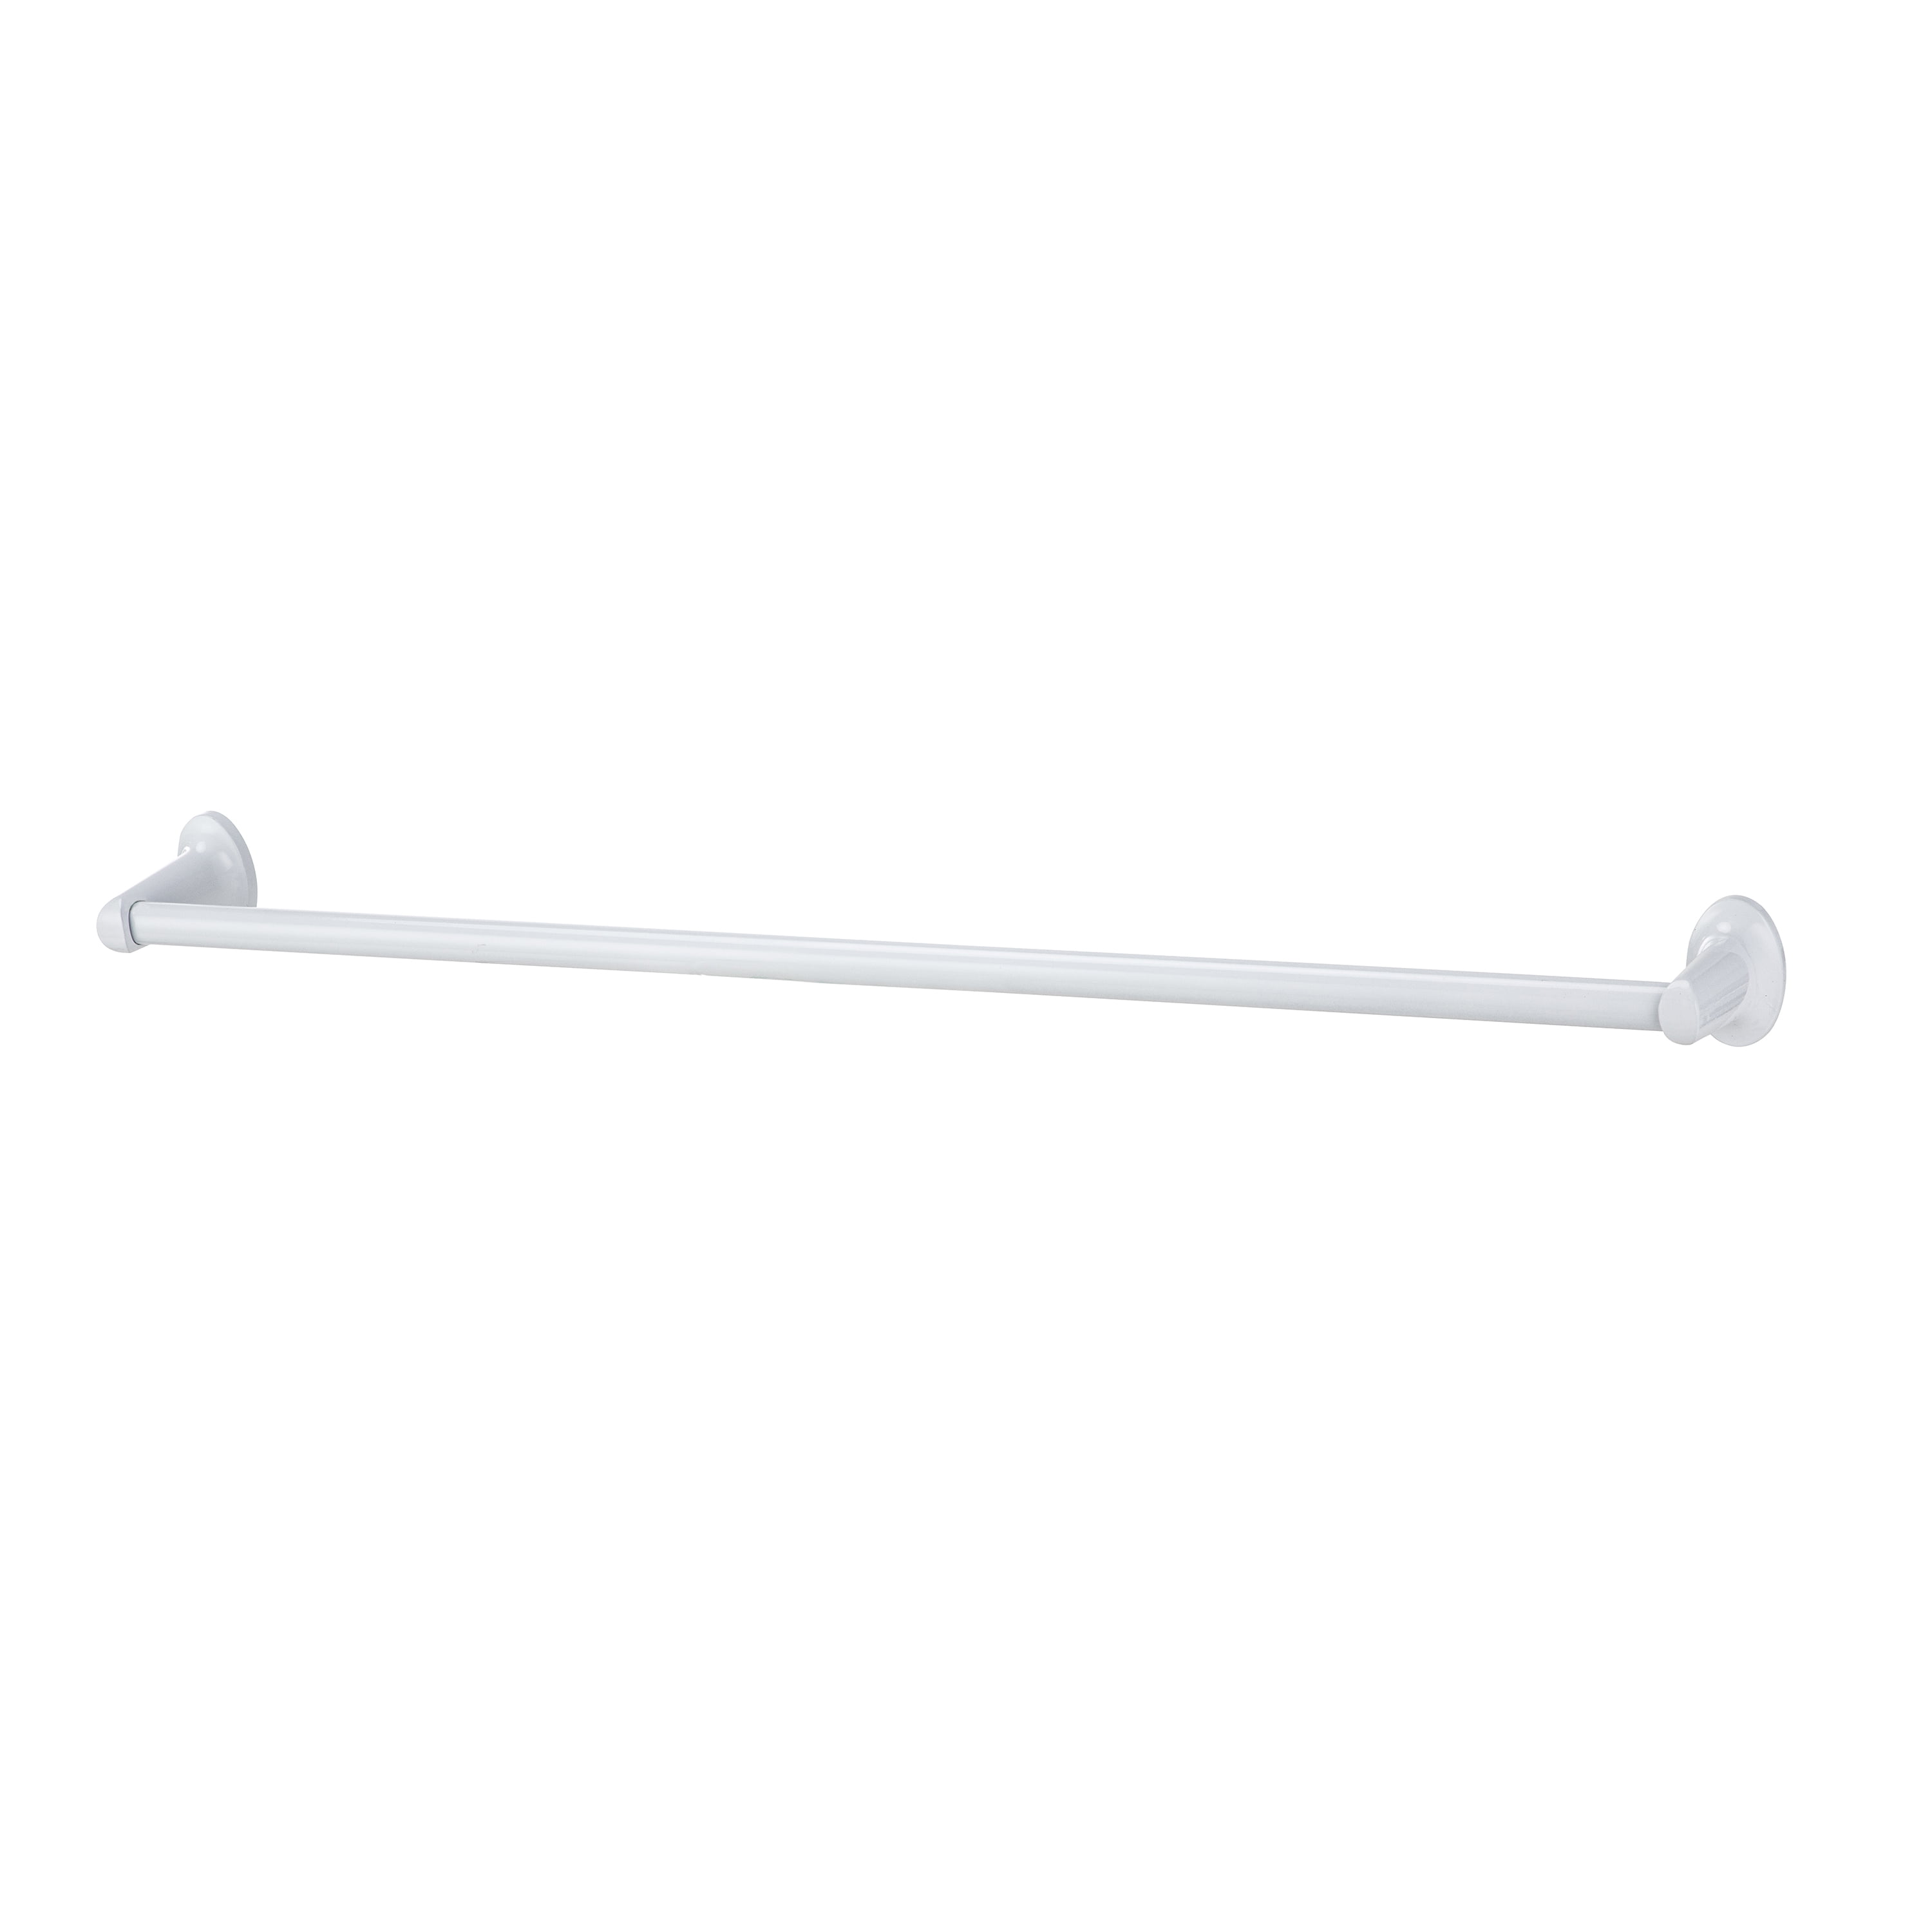 Mainstays Oval Style 24 inch Towel Holder Bar, White Finish